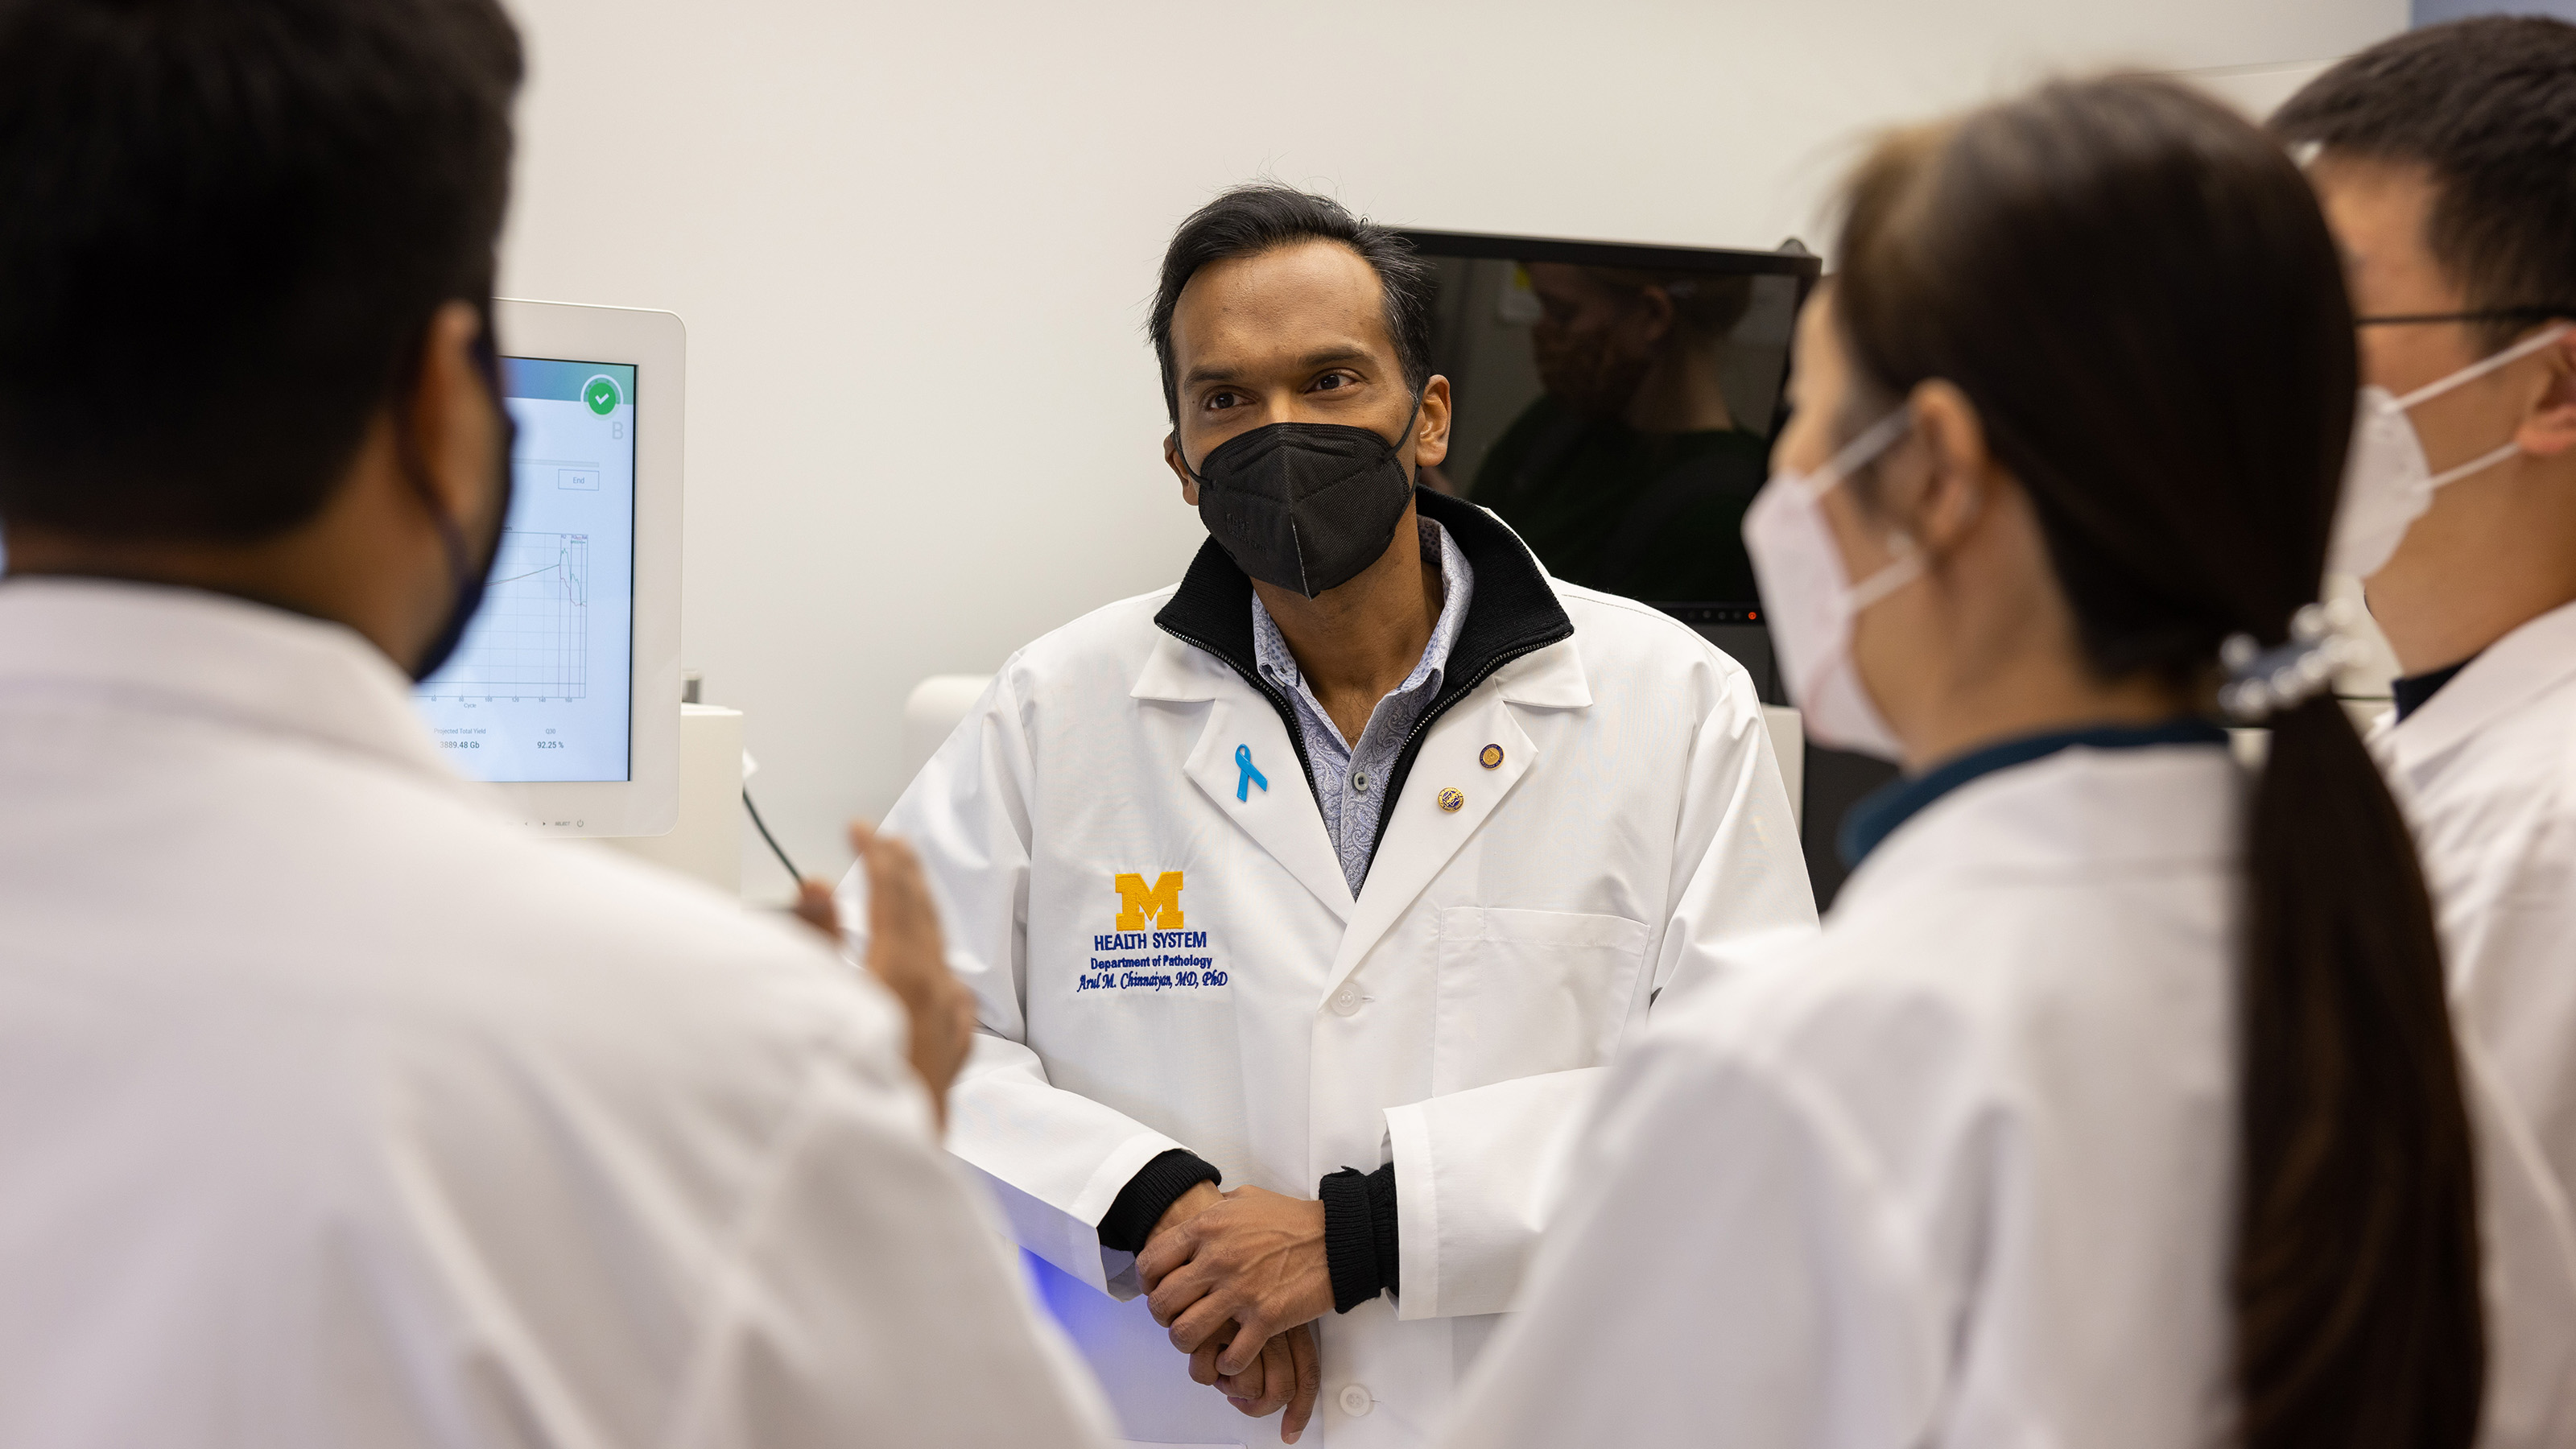 Arul Chinnaiyan and his team in the lab